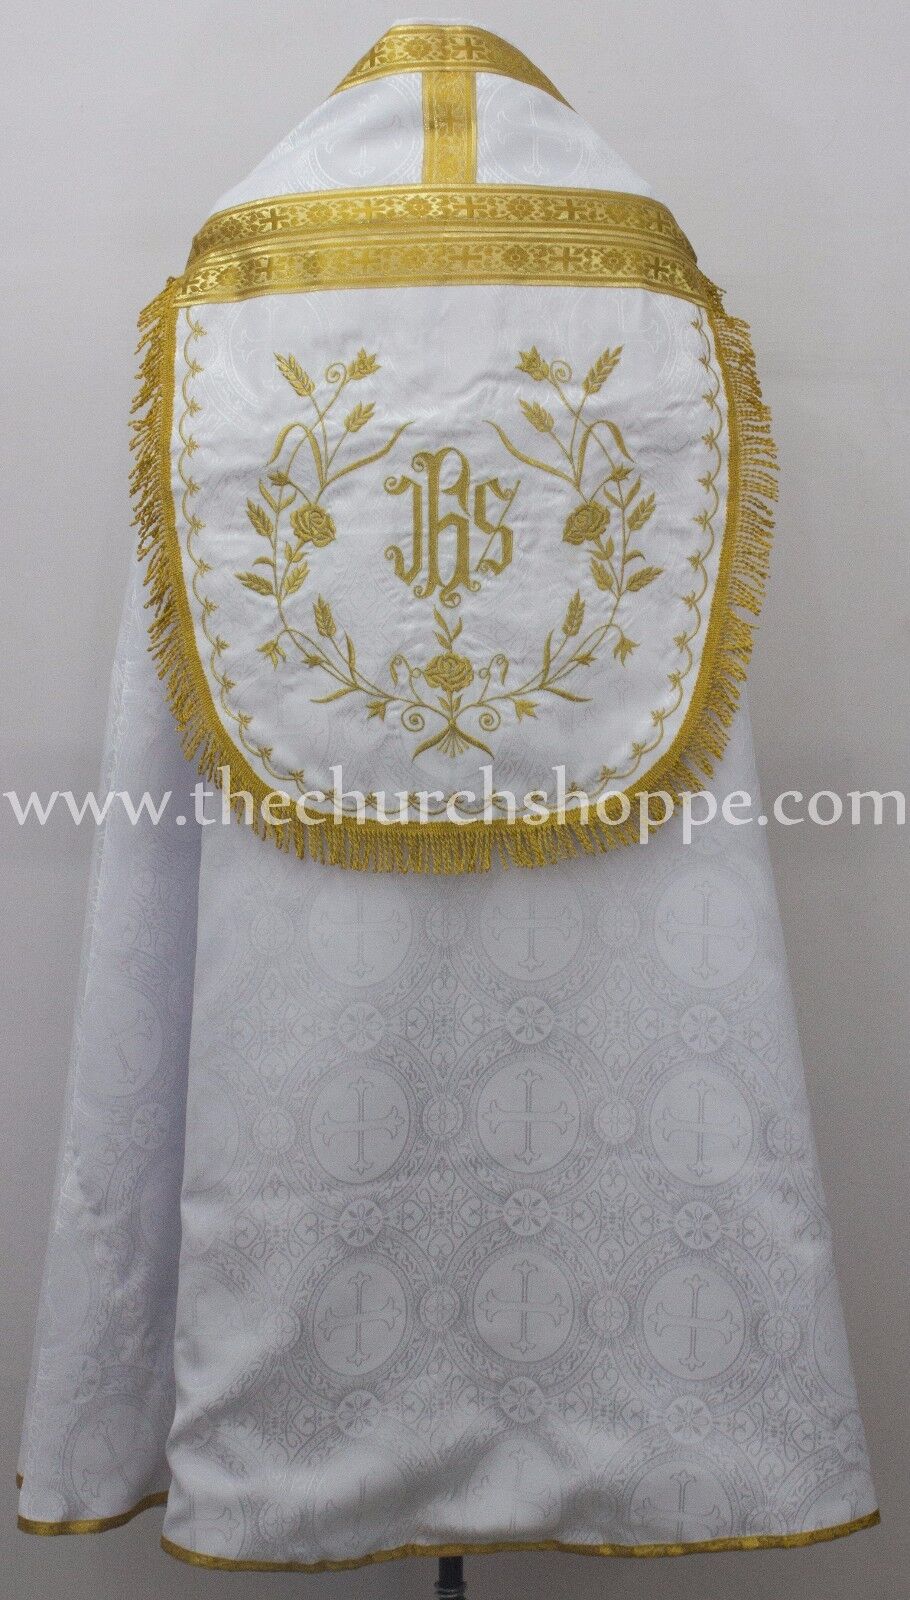 New WHITE Cope & Stole Set with IHS embroidery,capa pluvial,chape,far fronte